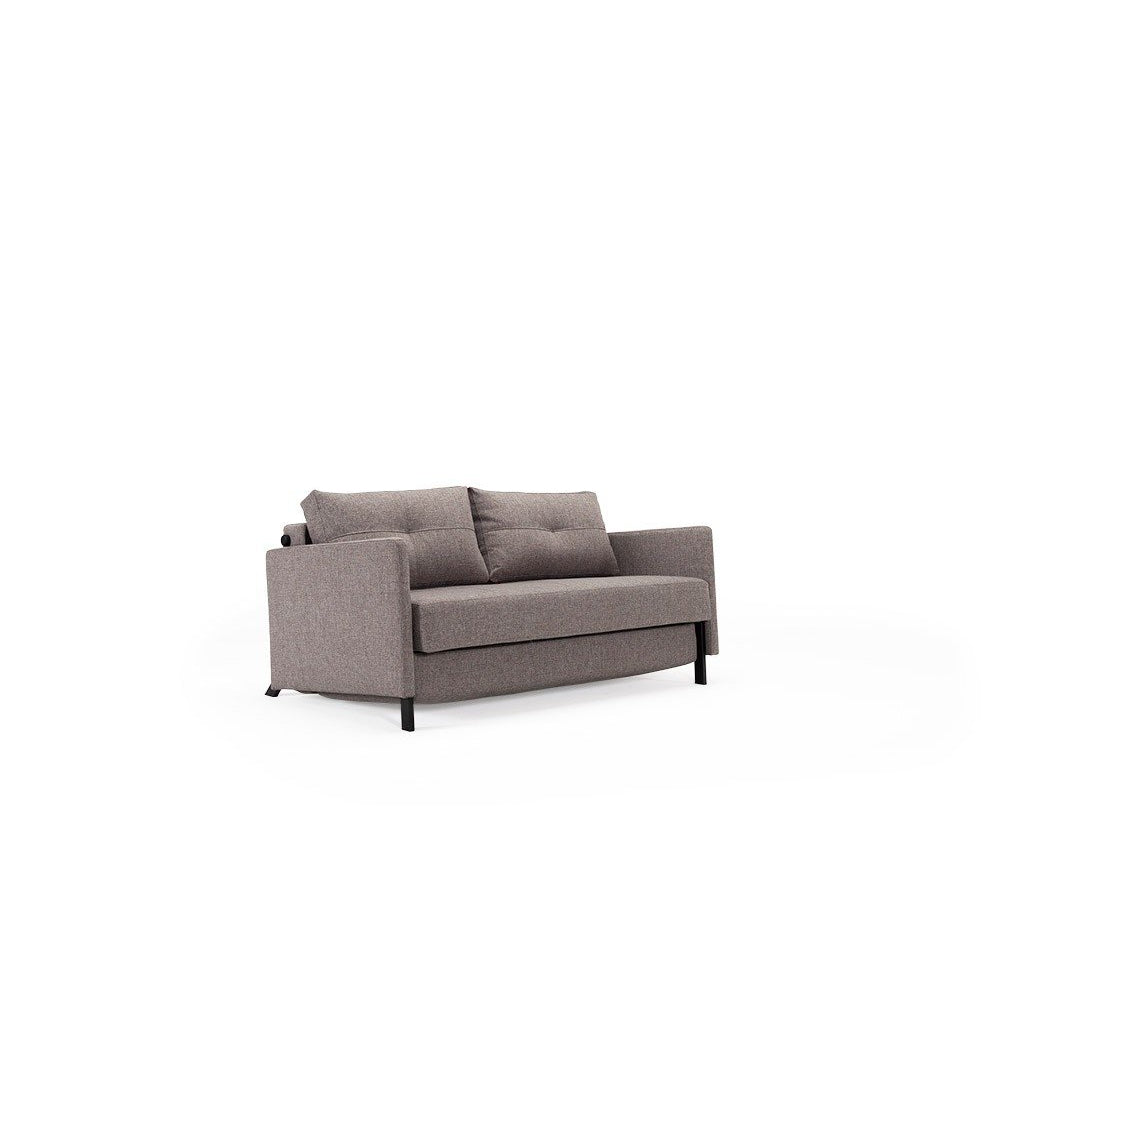 Cubed 02 deluxe sofa SOFA W/ARMS (FULL)-Innovation Living-INNO-94-744002020521-2-SofasMixed Dance Grey-1-France and Son